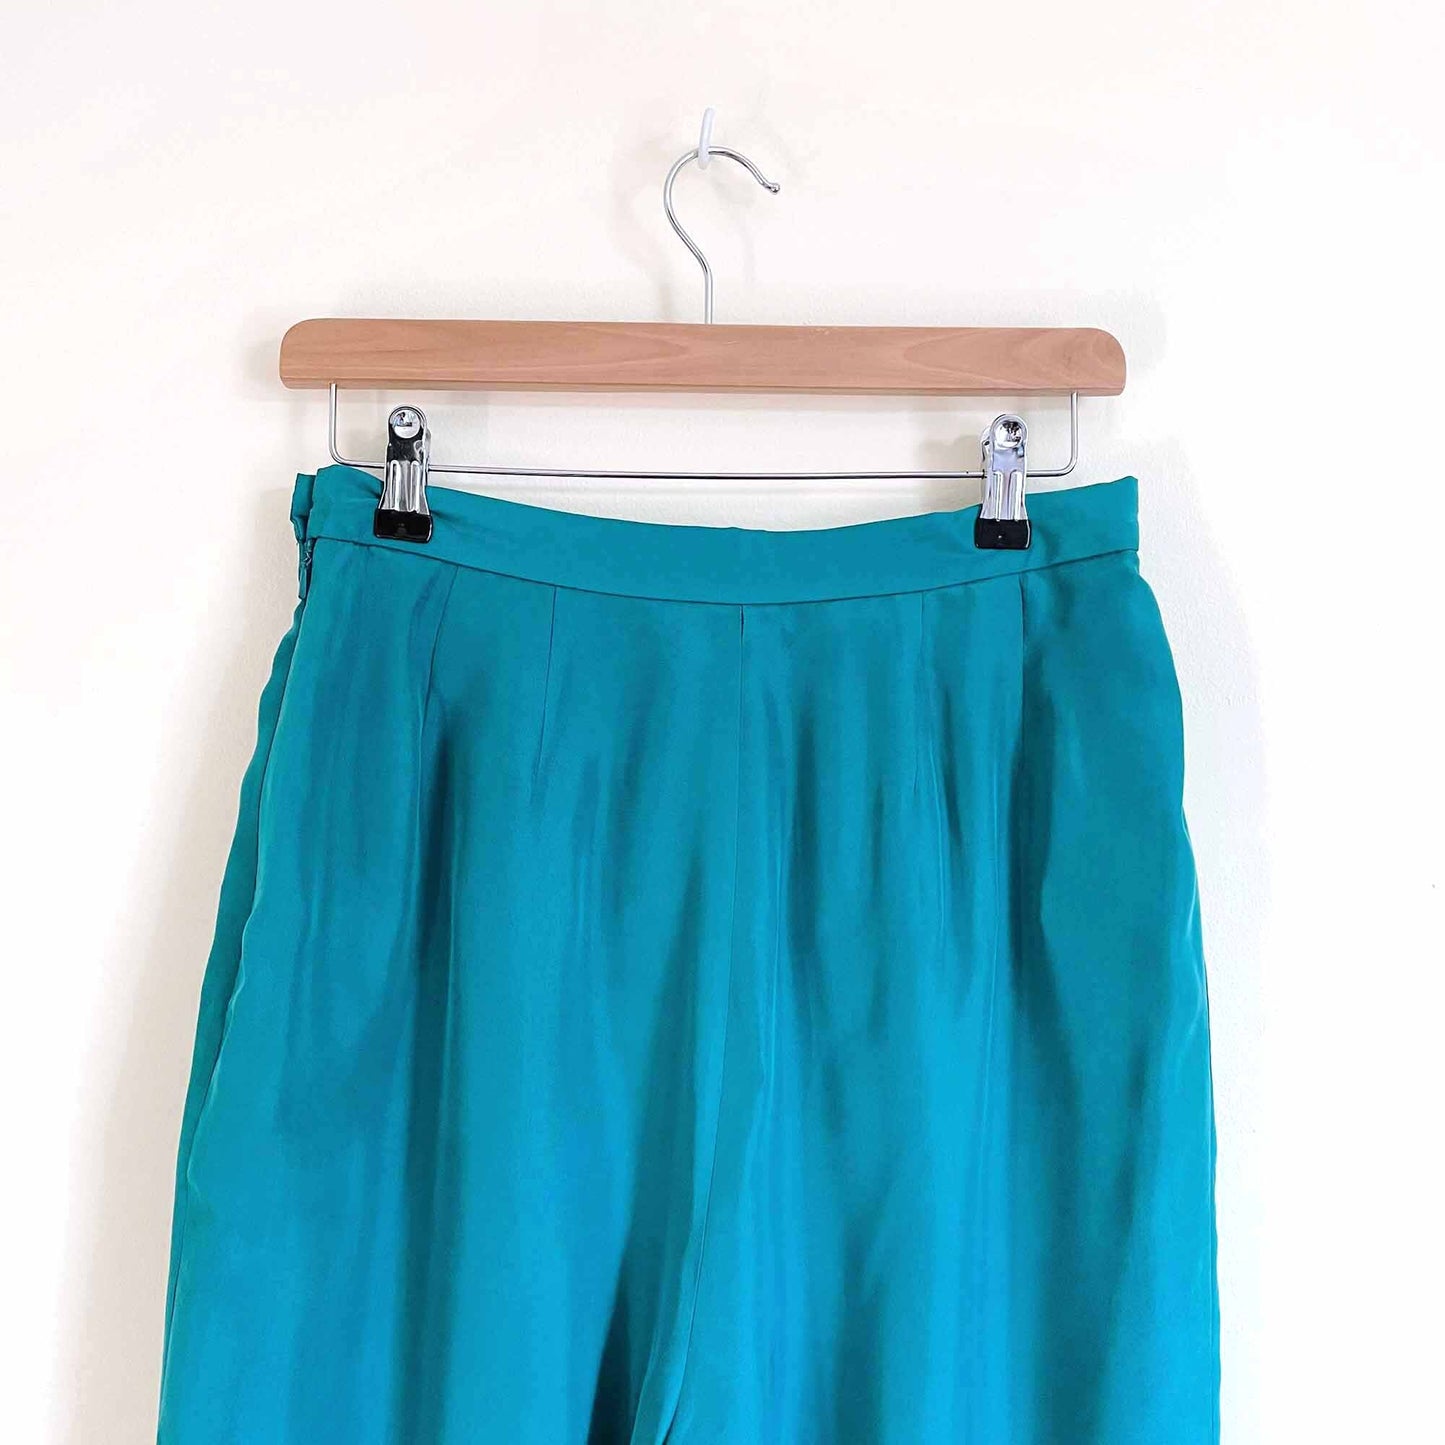 vintage patrick collection high rise teal silk trouser - size 8